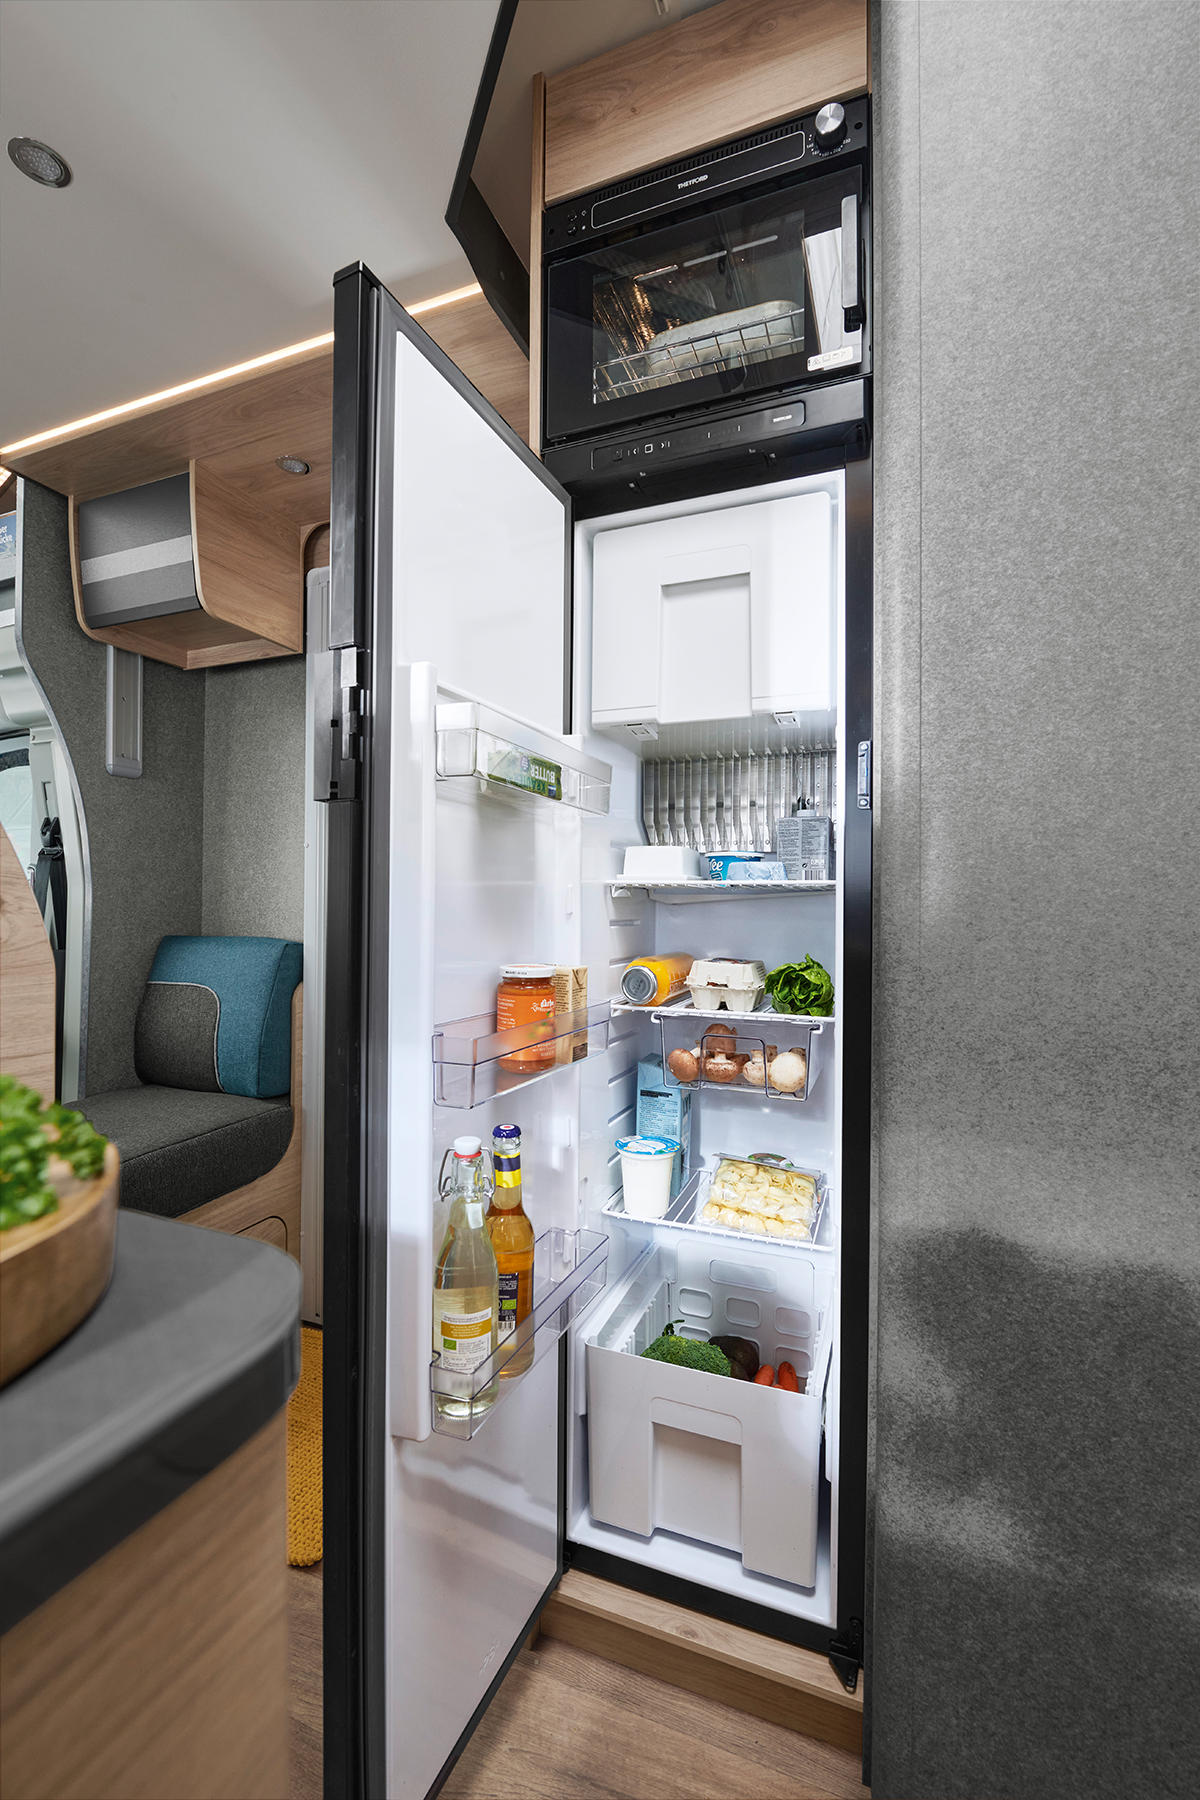 An oven can be added to the 142-litre fridge / freezer combination on request.